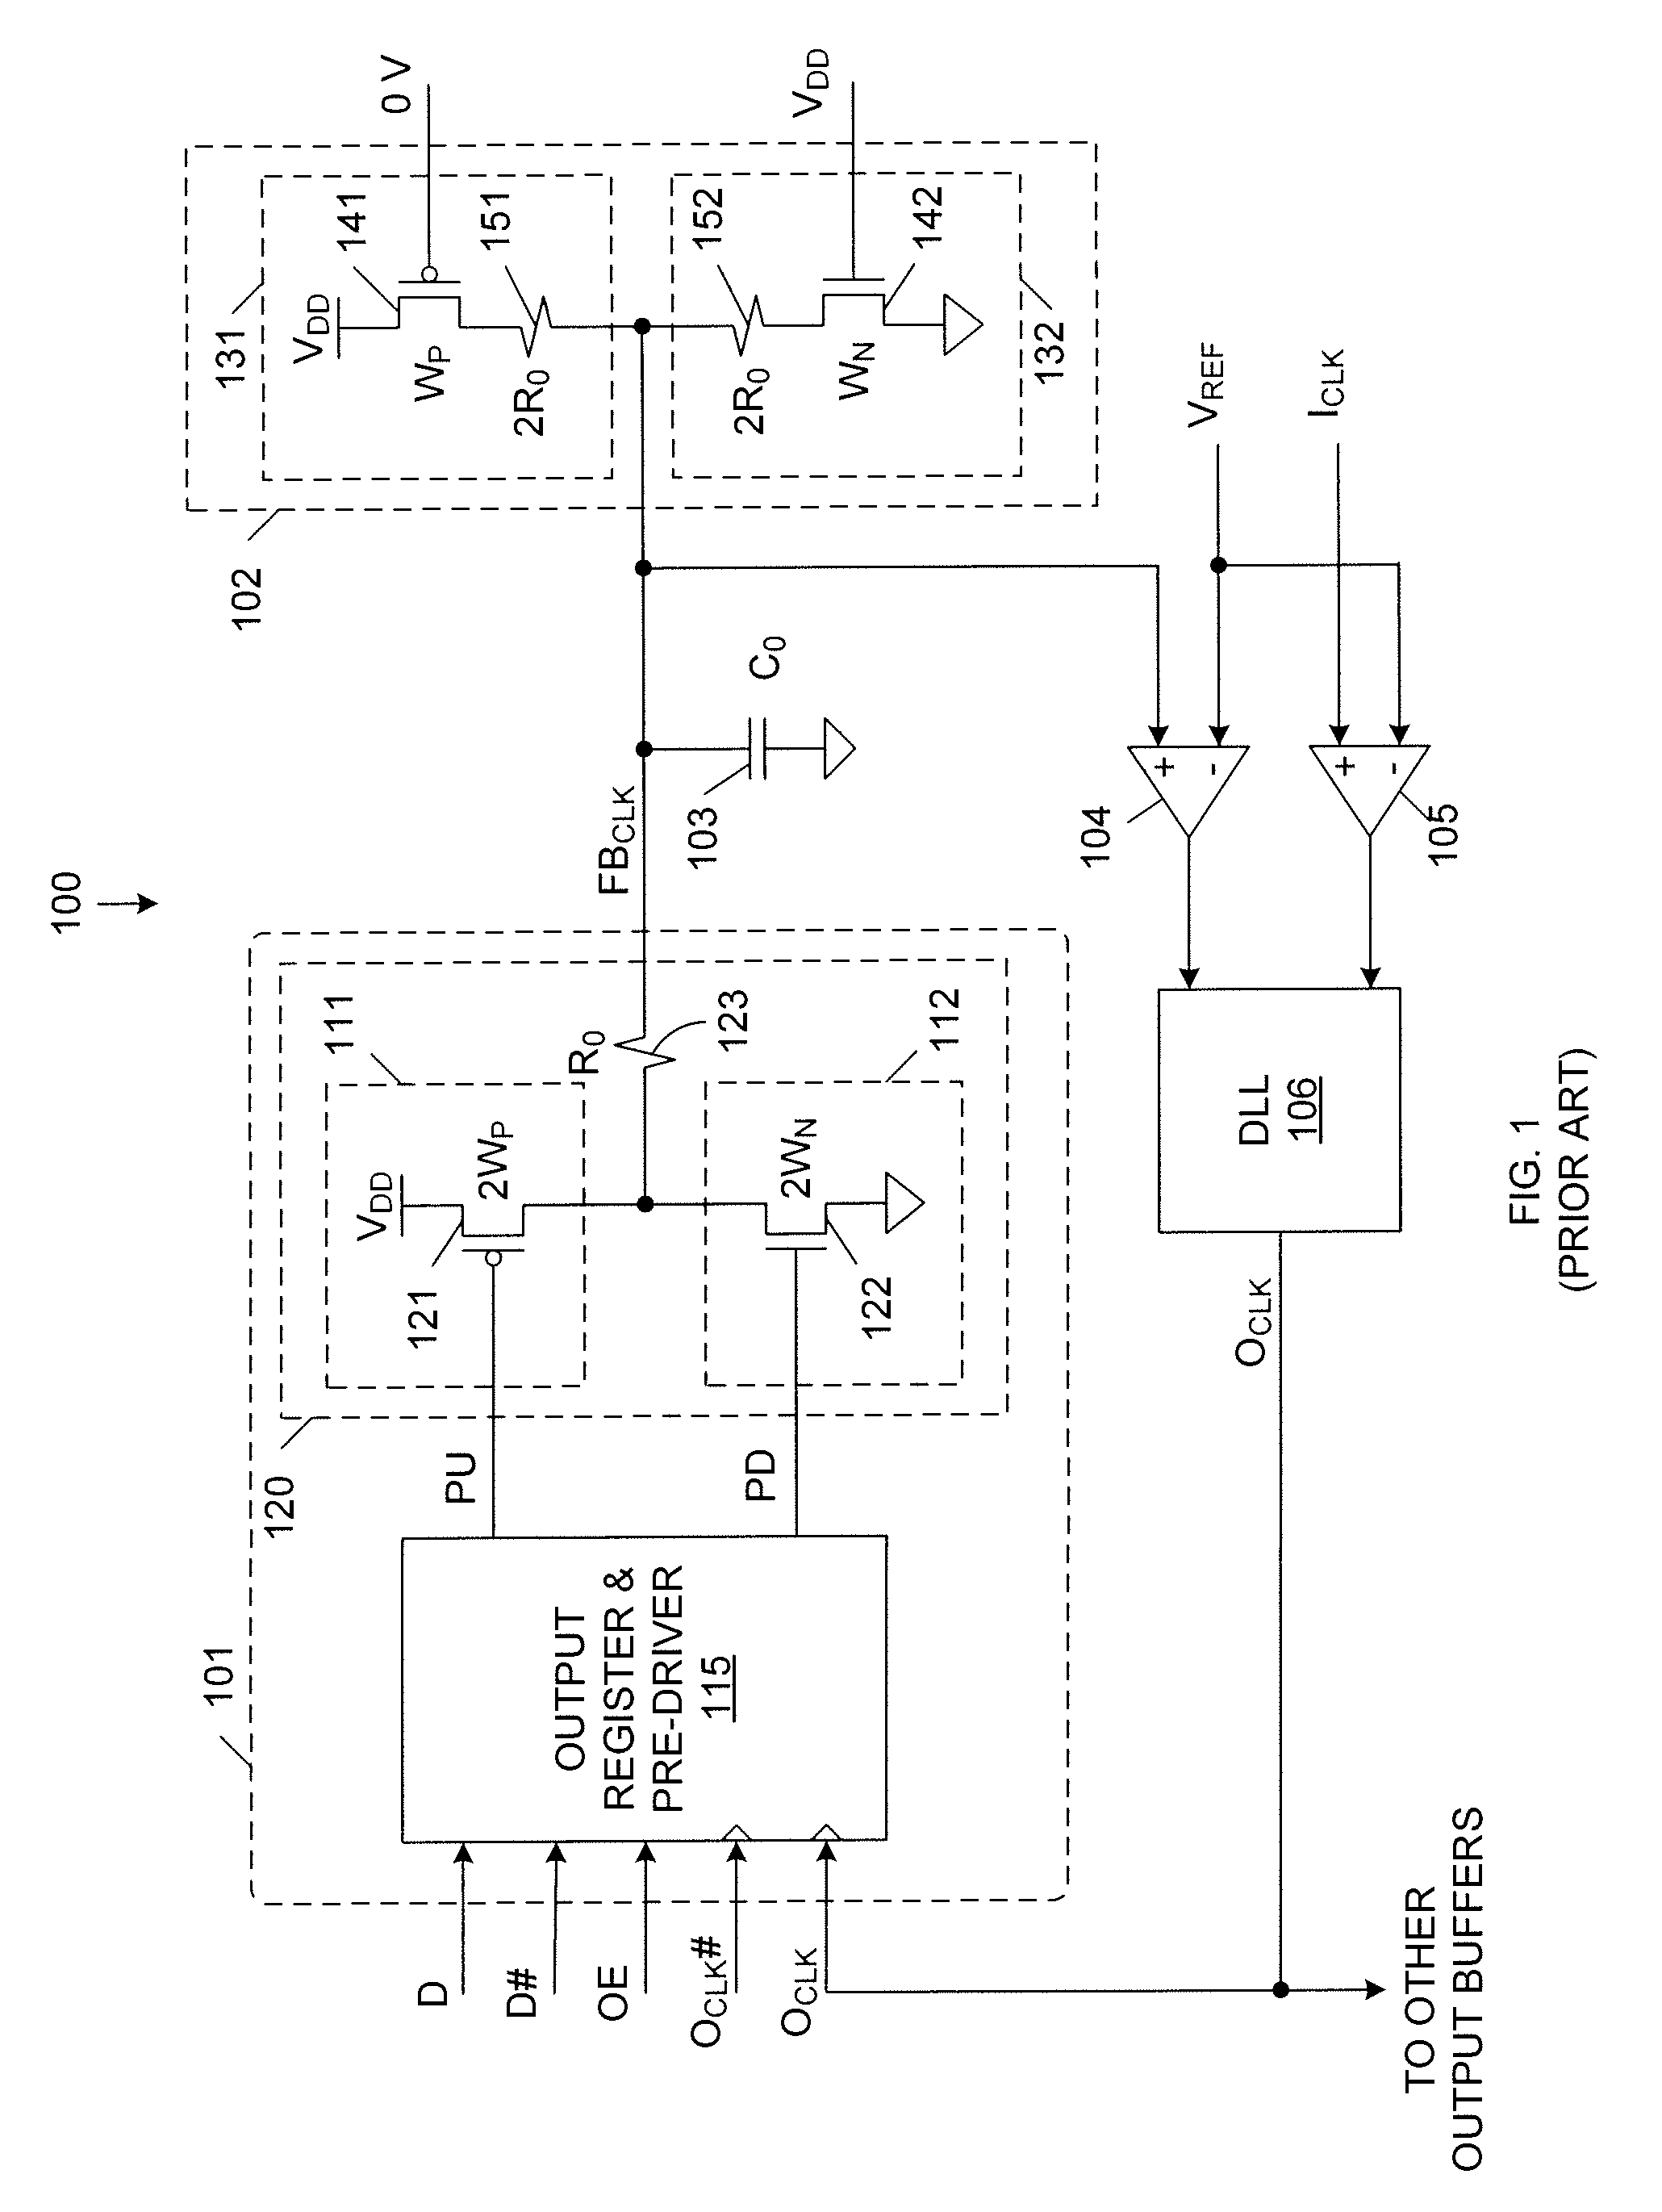 Input termination for delay locked loop feedback with impedance matching